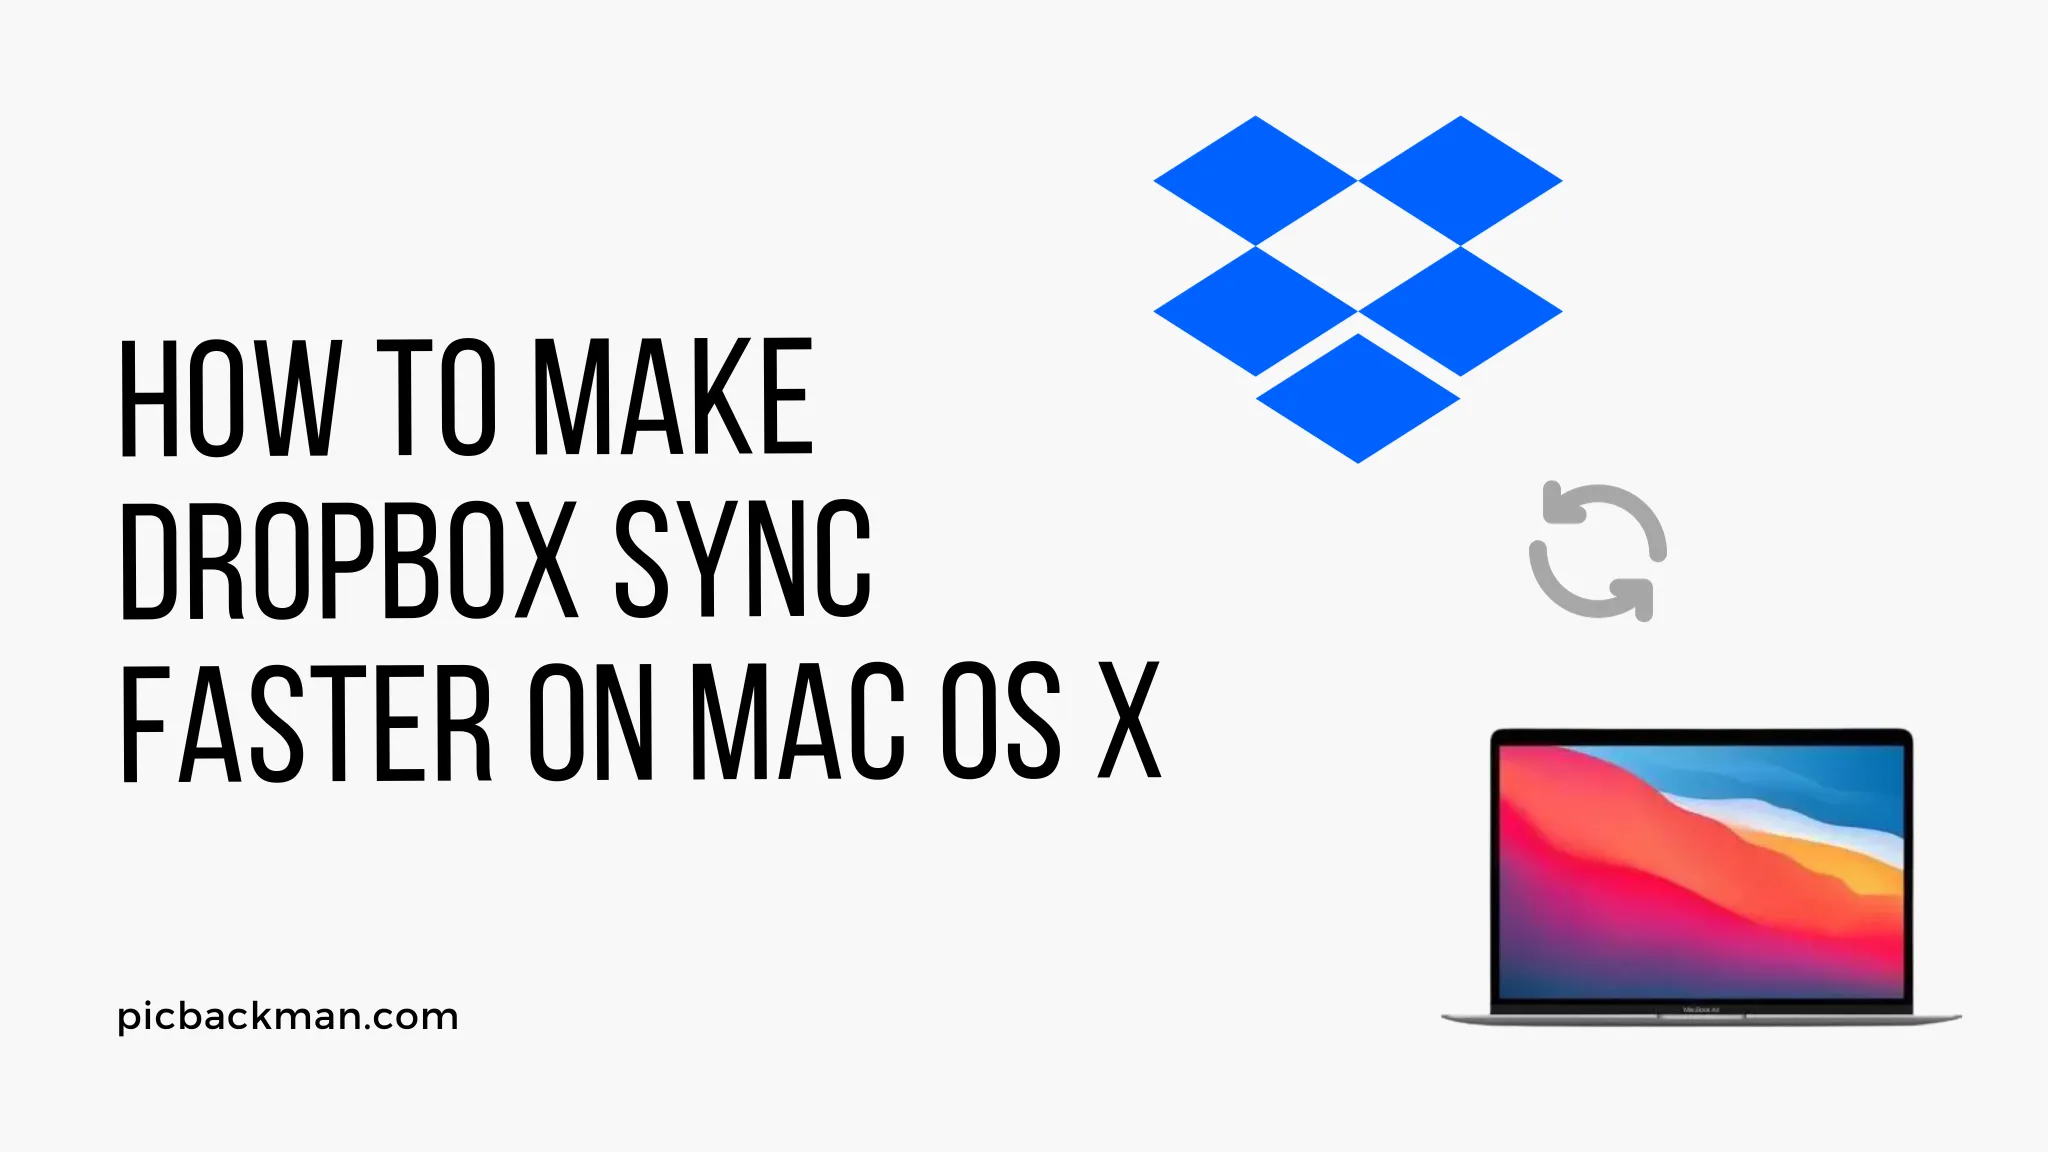 How to Make Dropbox Sync Faster on Mac OS X?